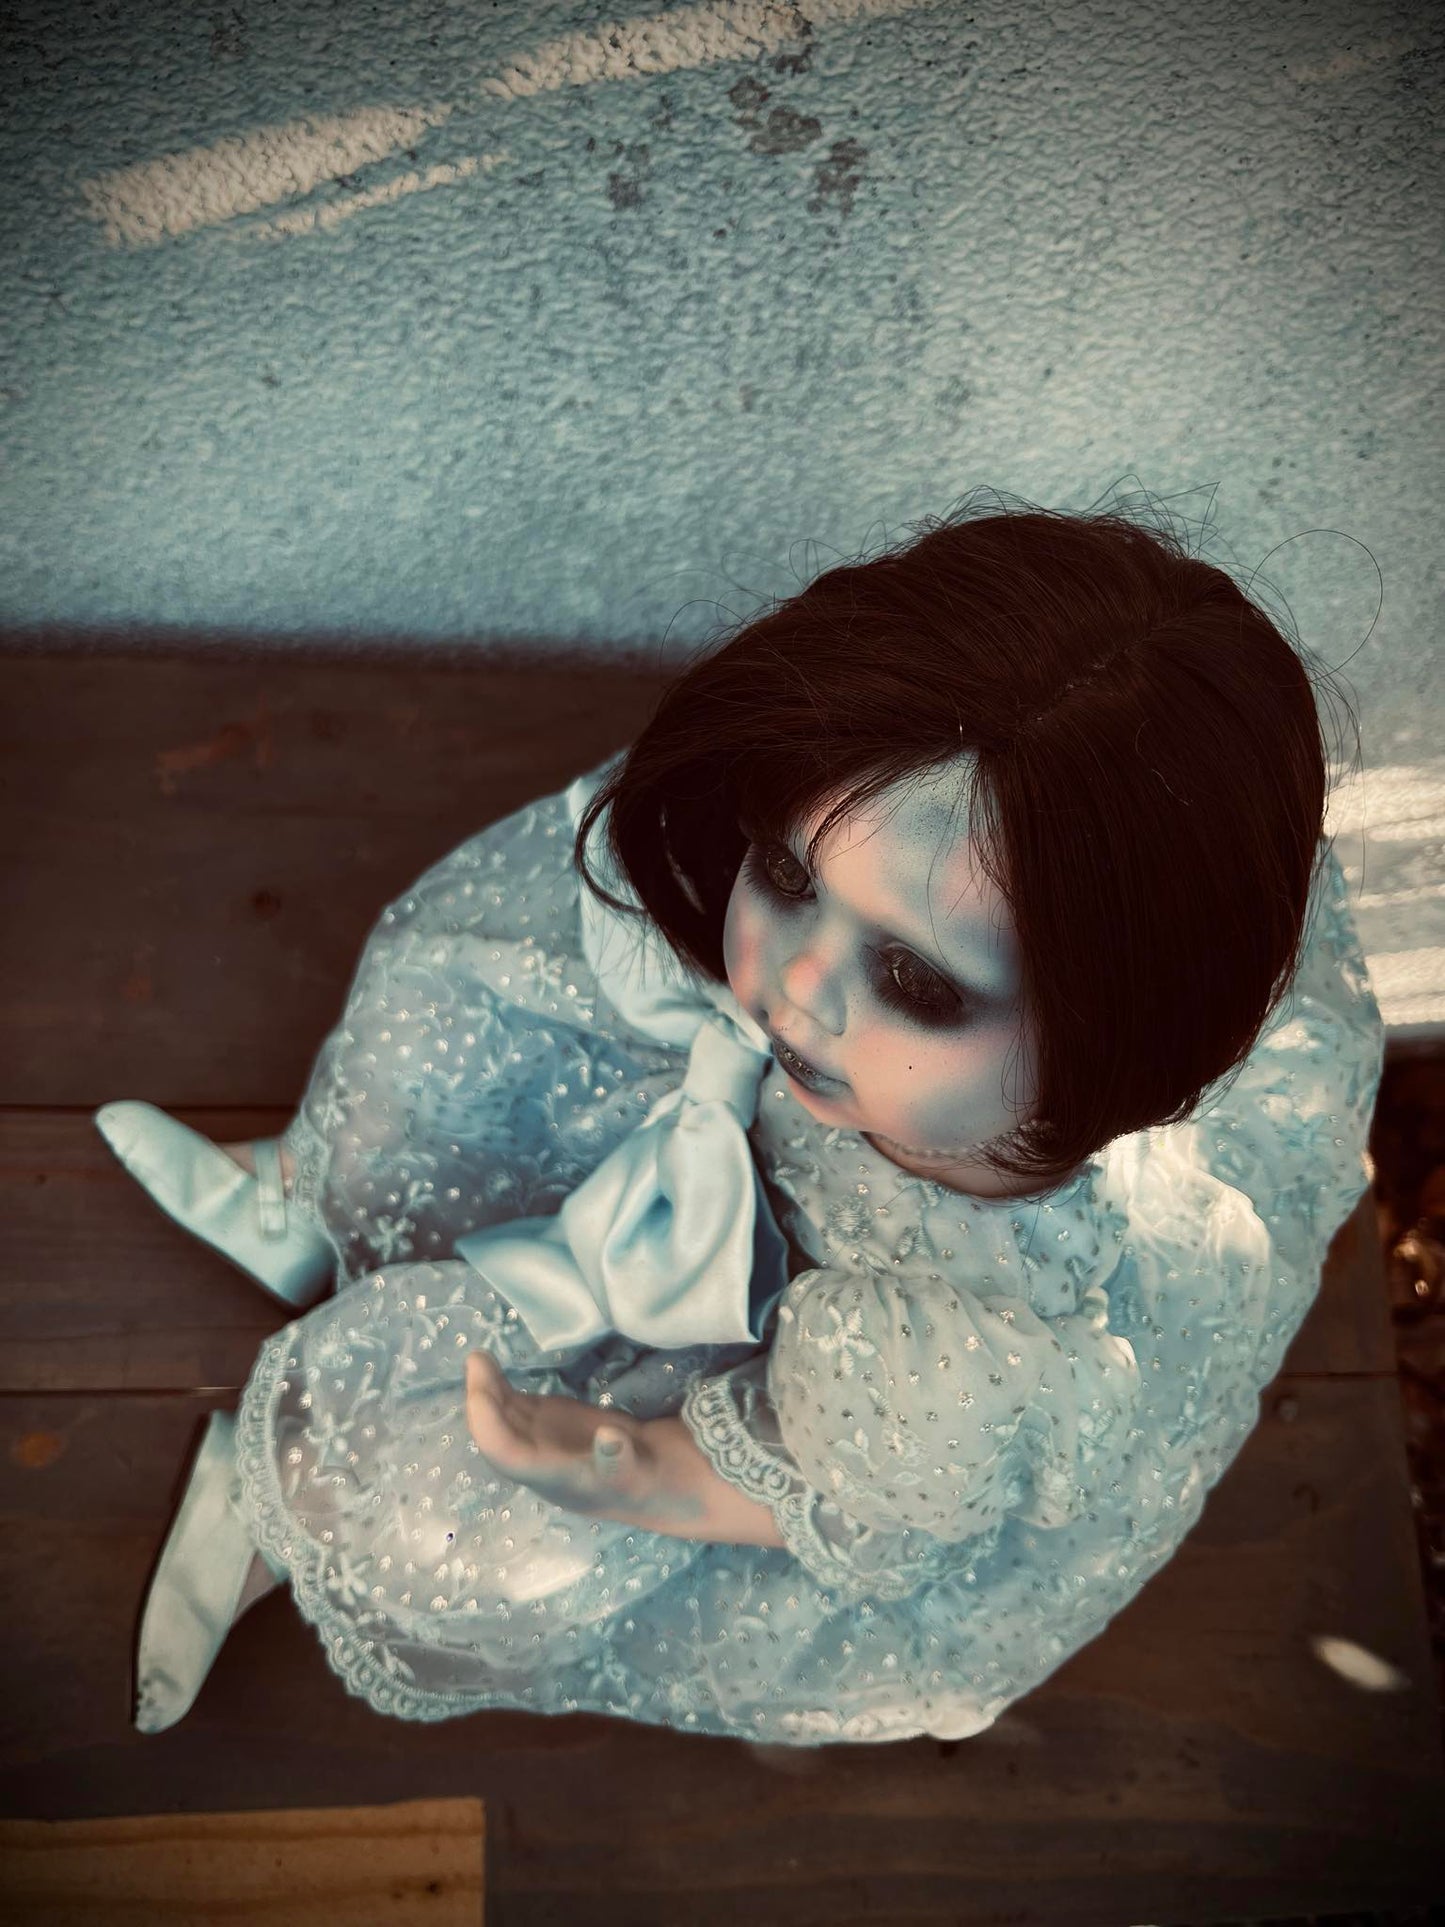 Meet Cassandra 20" Doll Porcelain Zombie Undead Witchy Creepy Haunted Spirit Infected Scary Spooky Possessed Positive Oddity Gift Idea